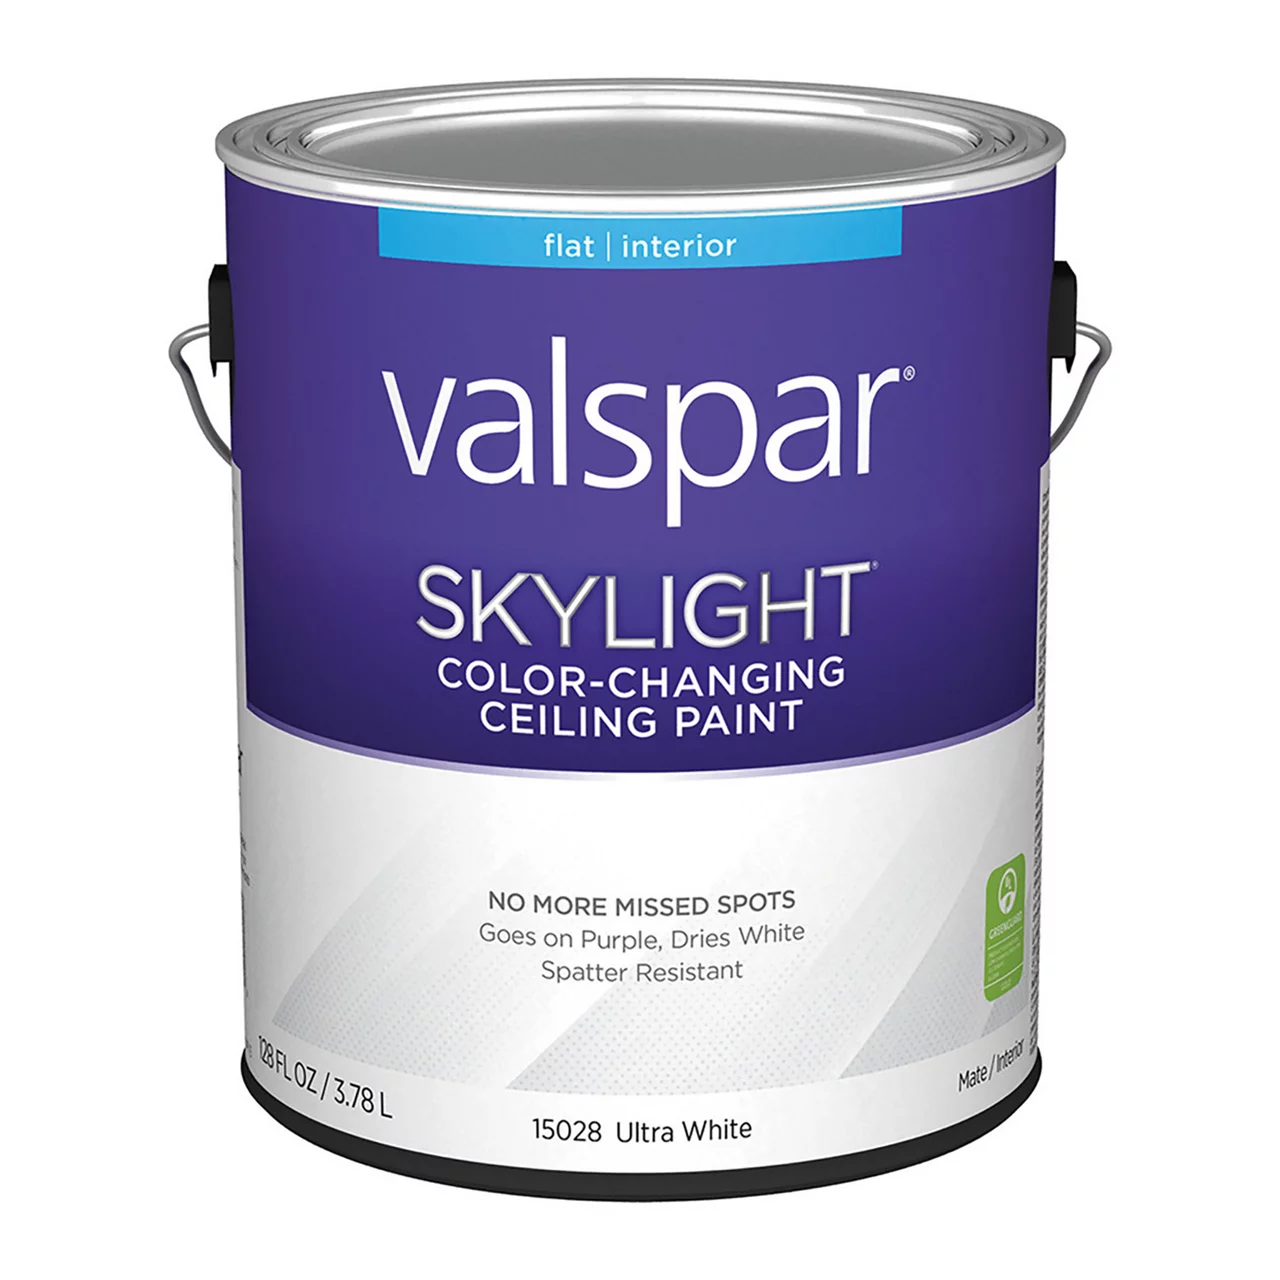 Color changing ceiling paint